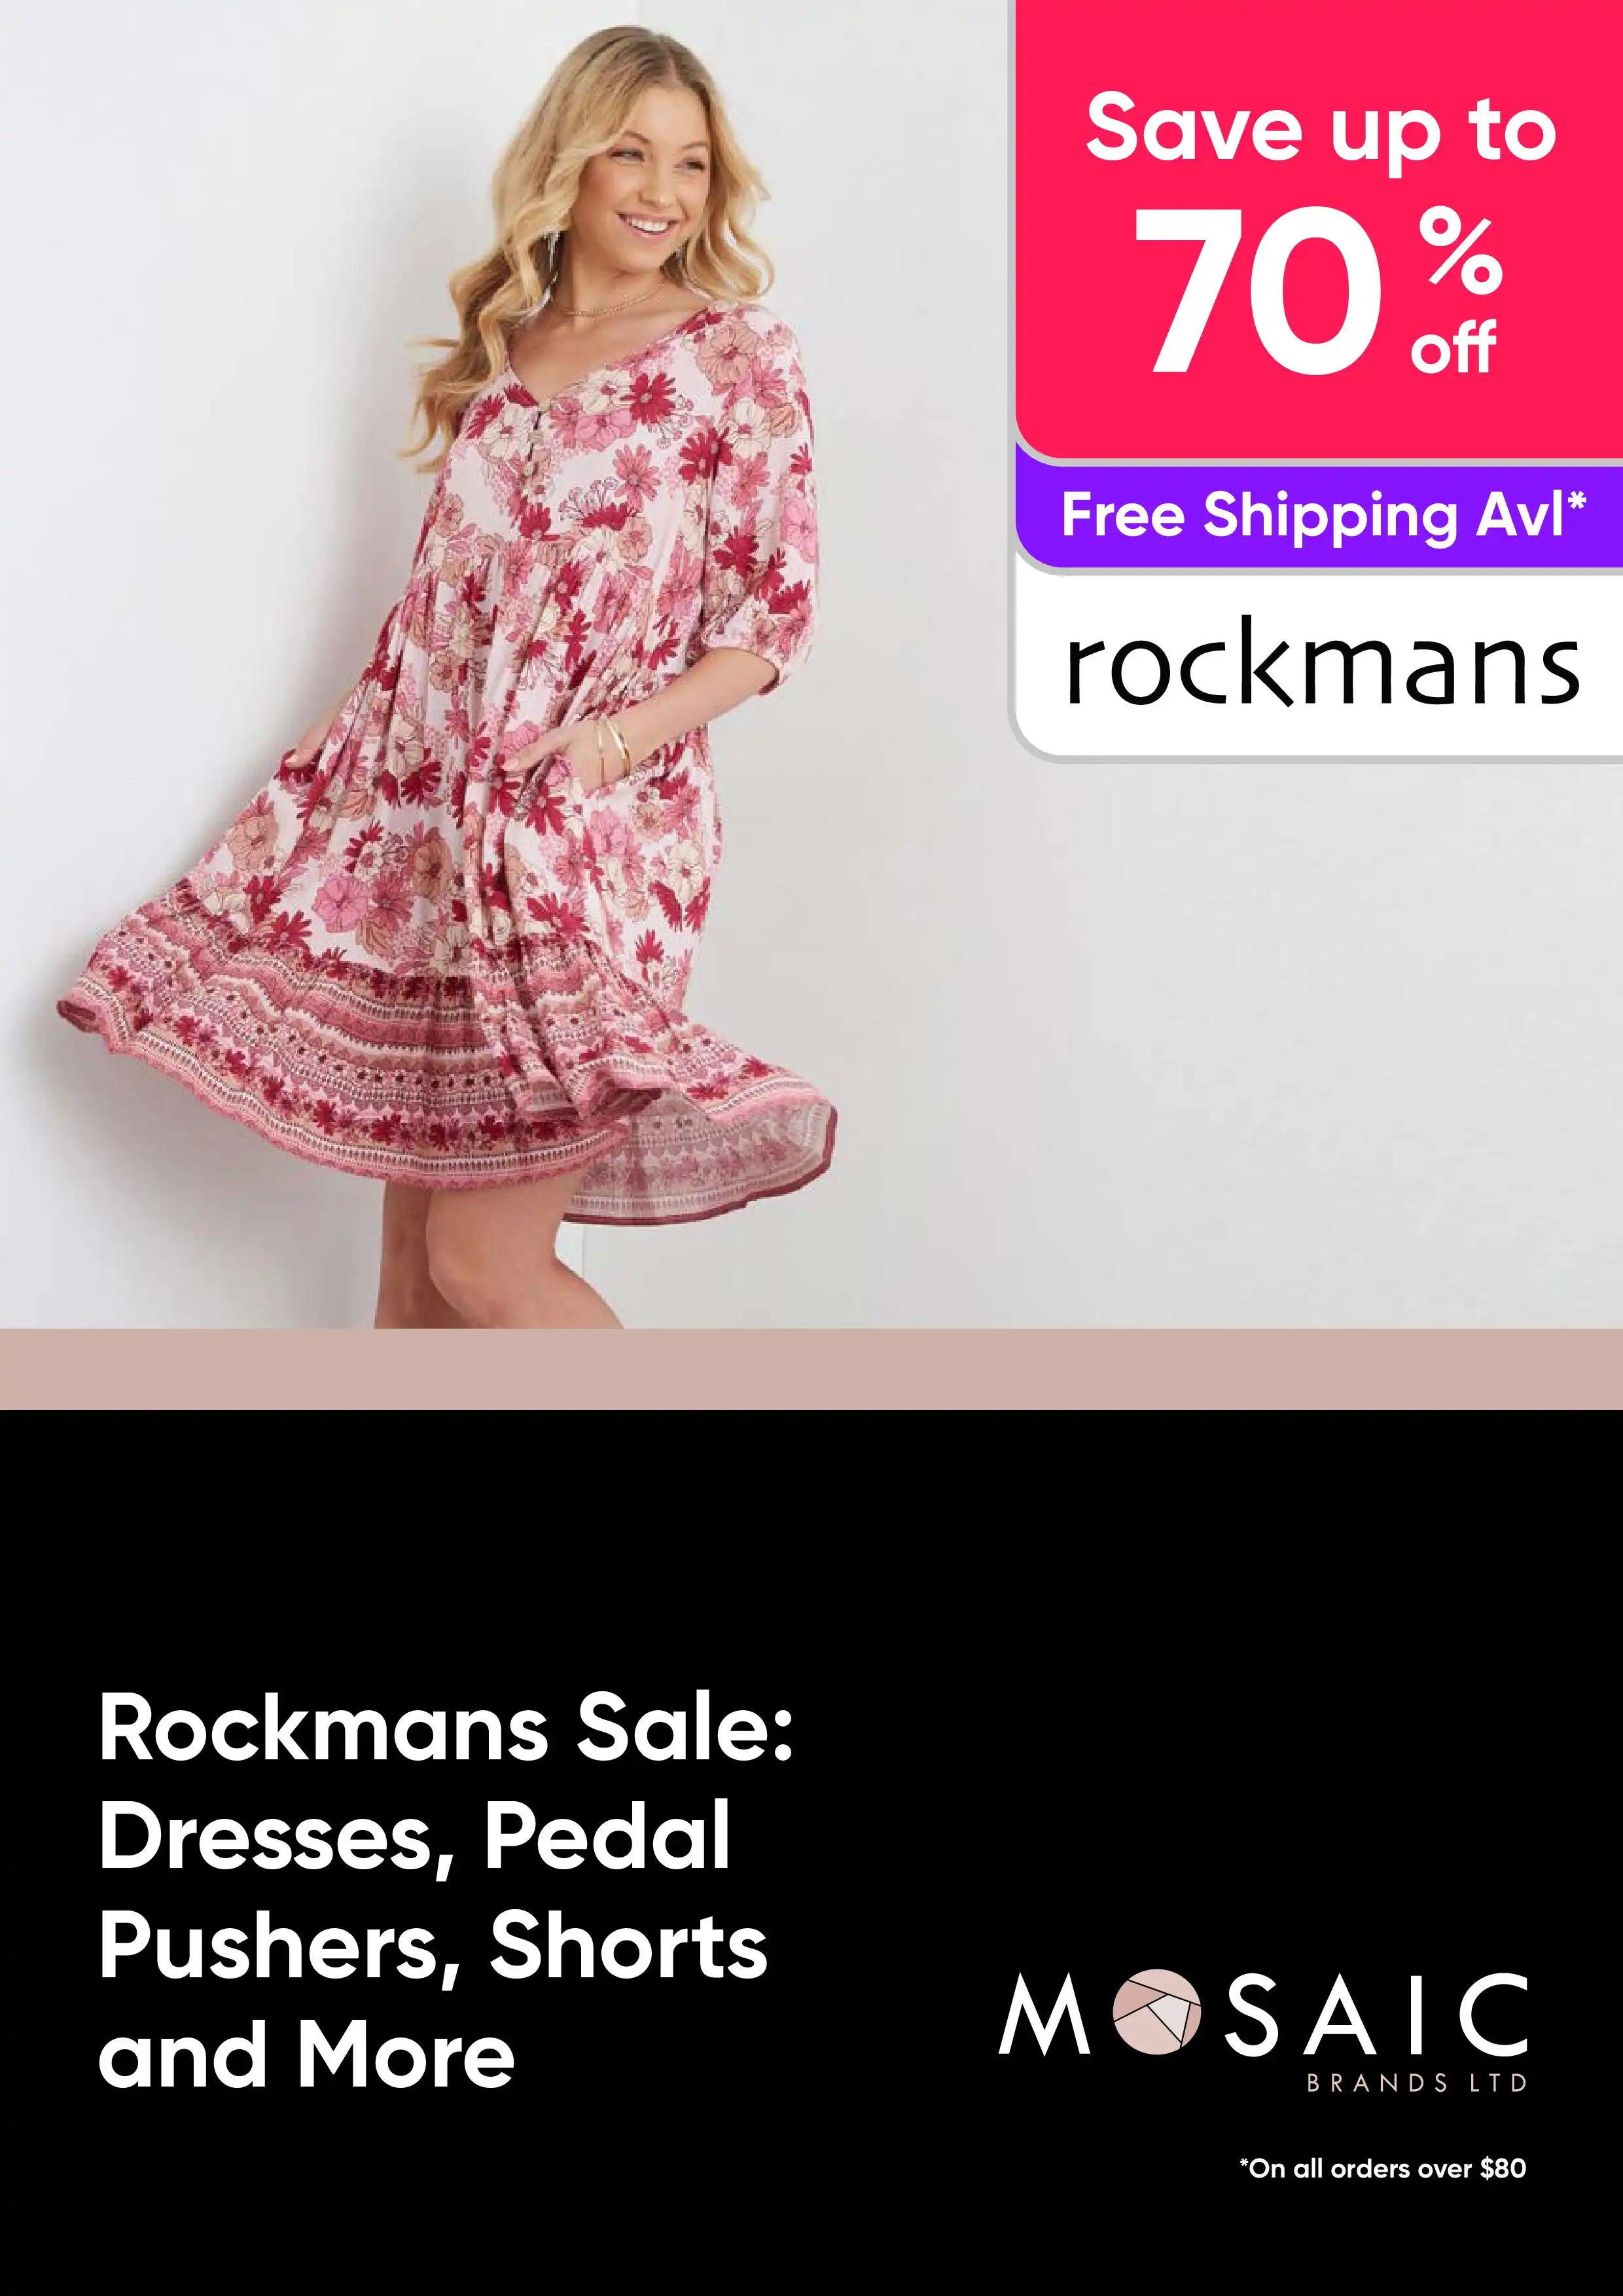 Rockmans Sale - Dresses, Pedal Pushers, Shorts and More - up to 70% off